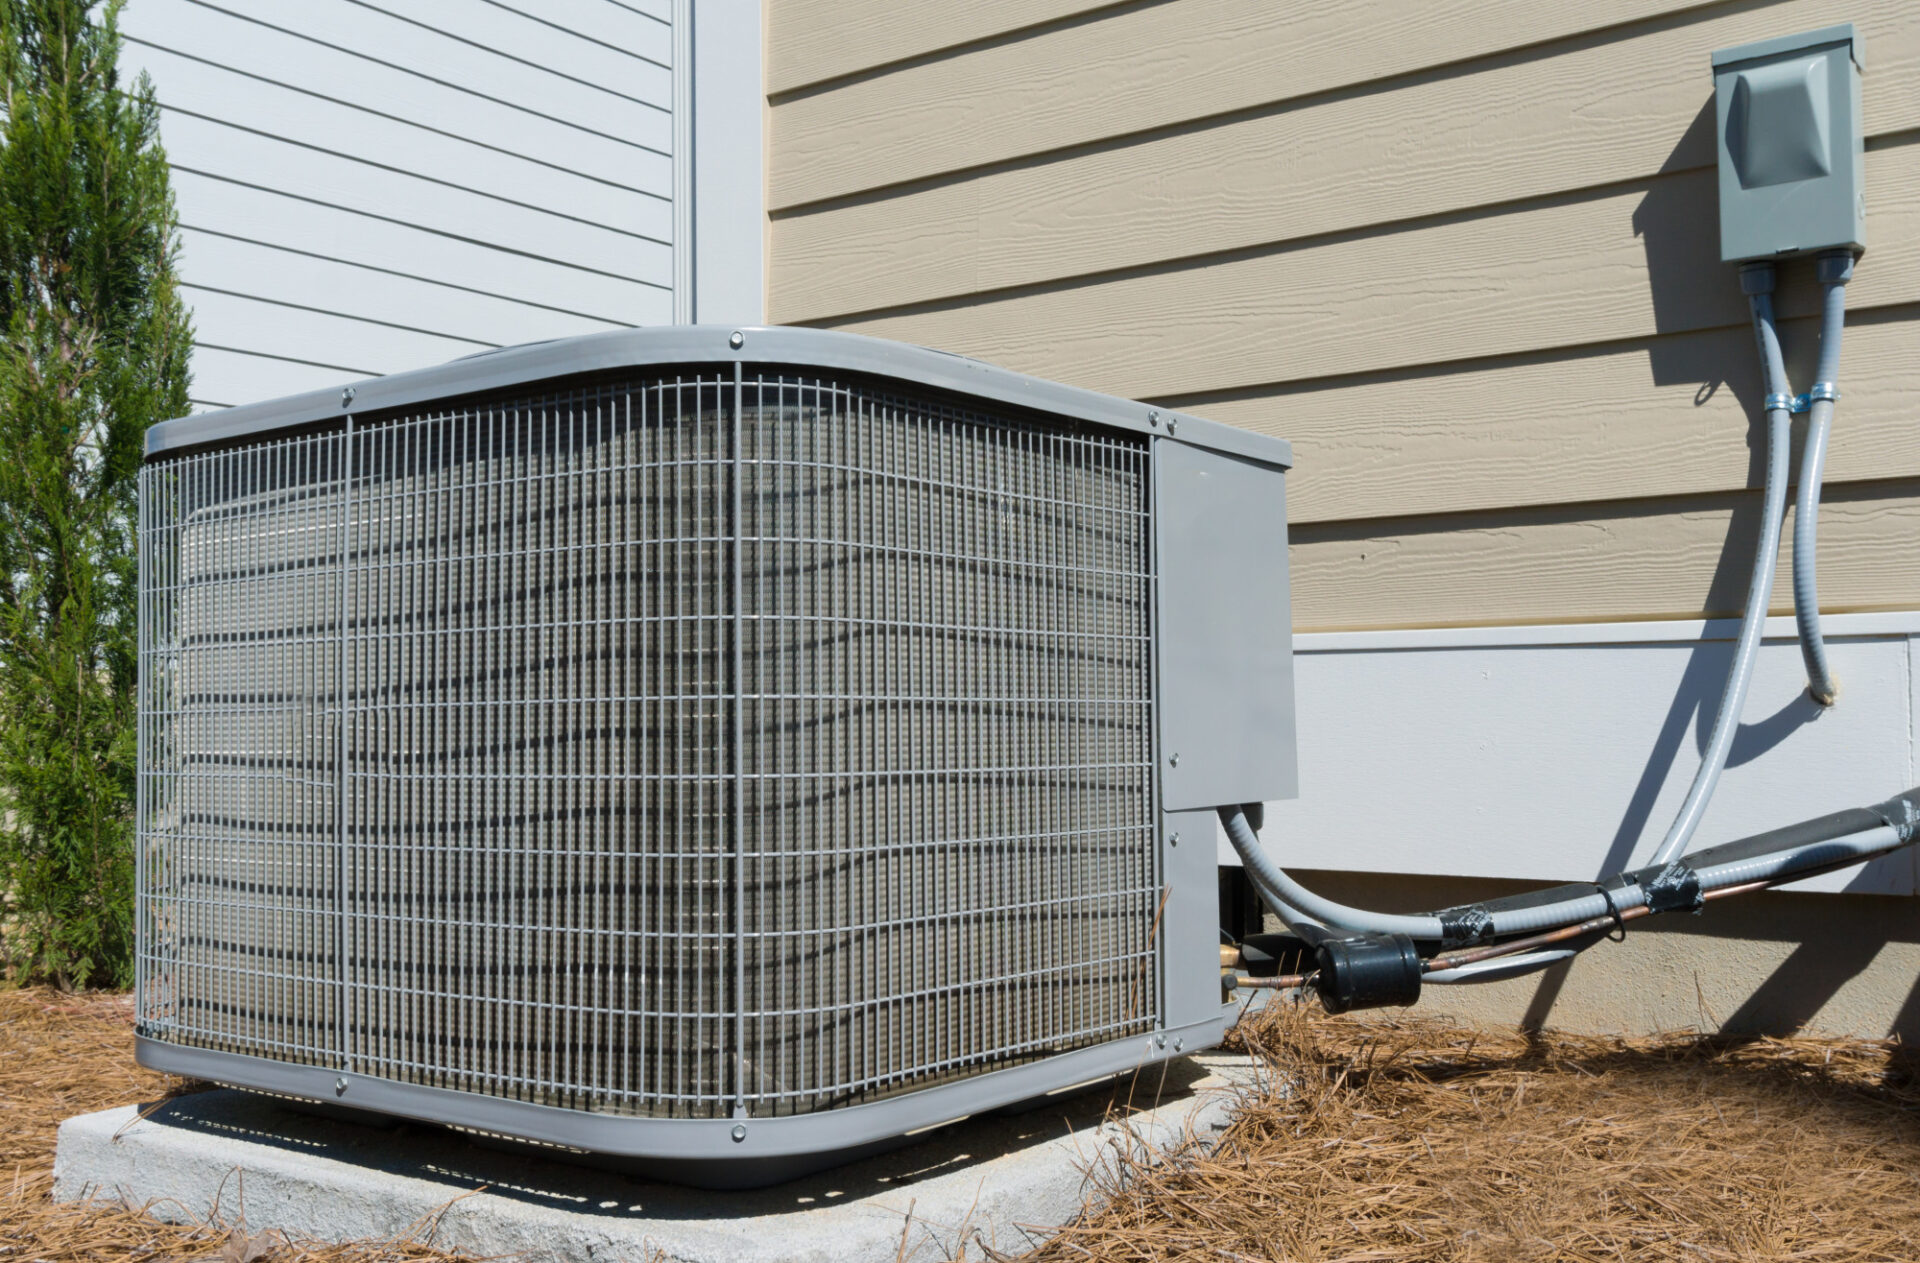 Heating and Air Conditioning Tips for the 2020 Atlantic Hurricane Season